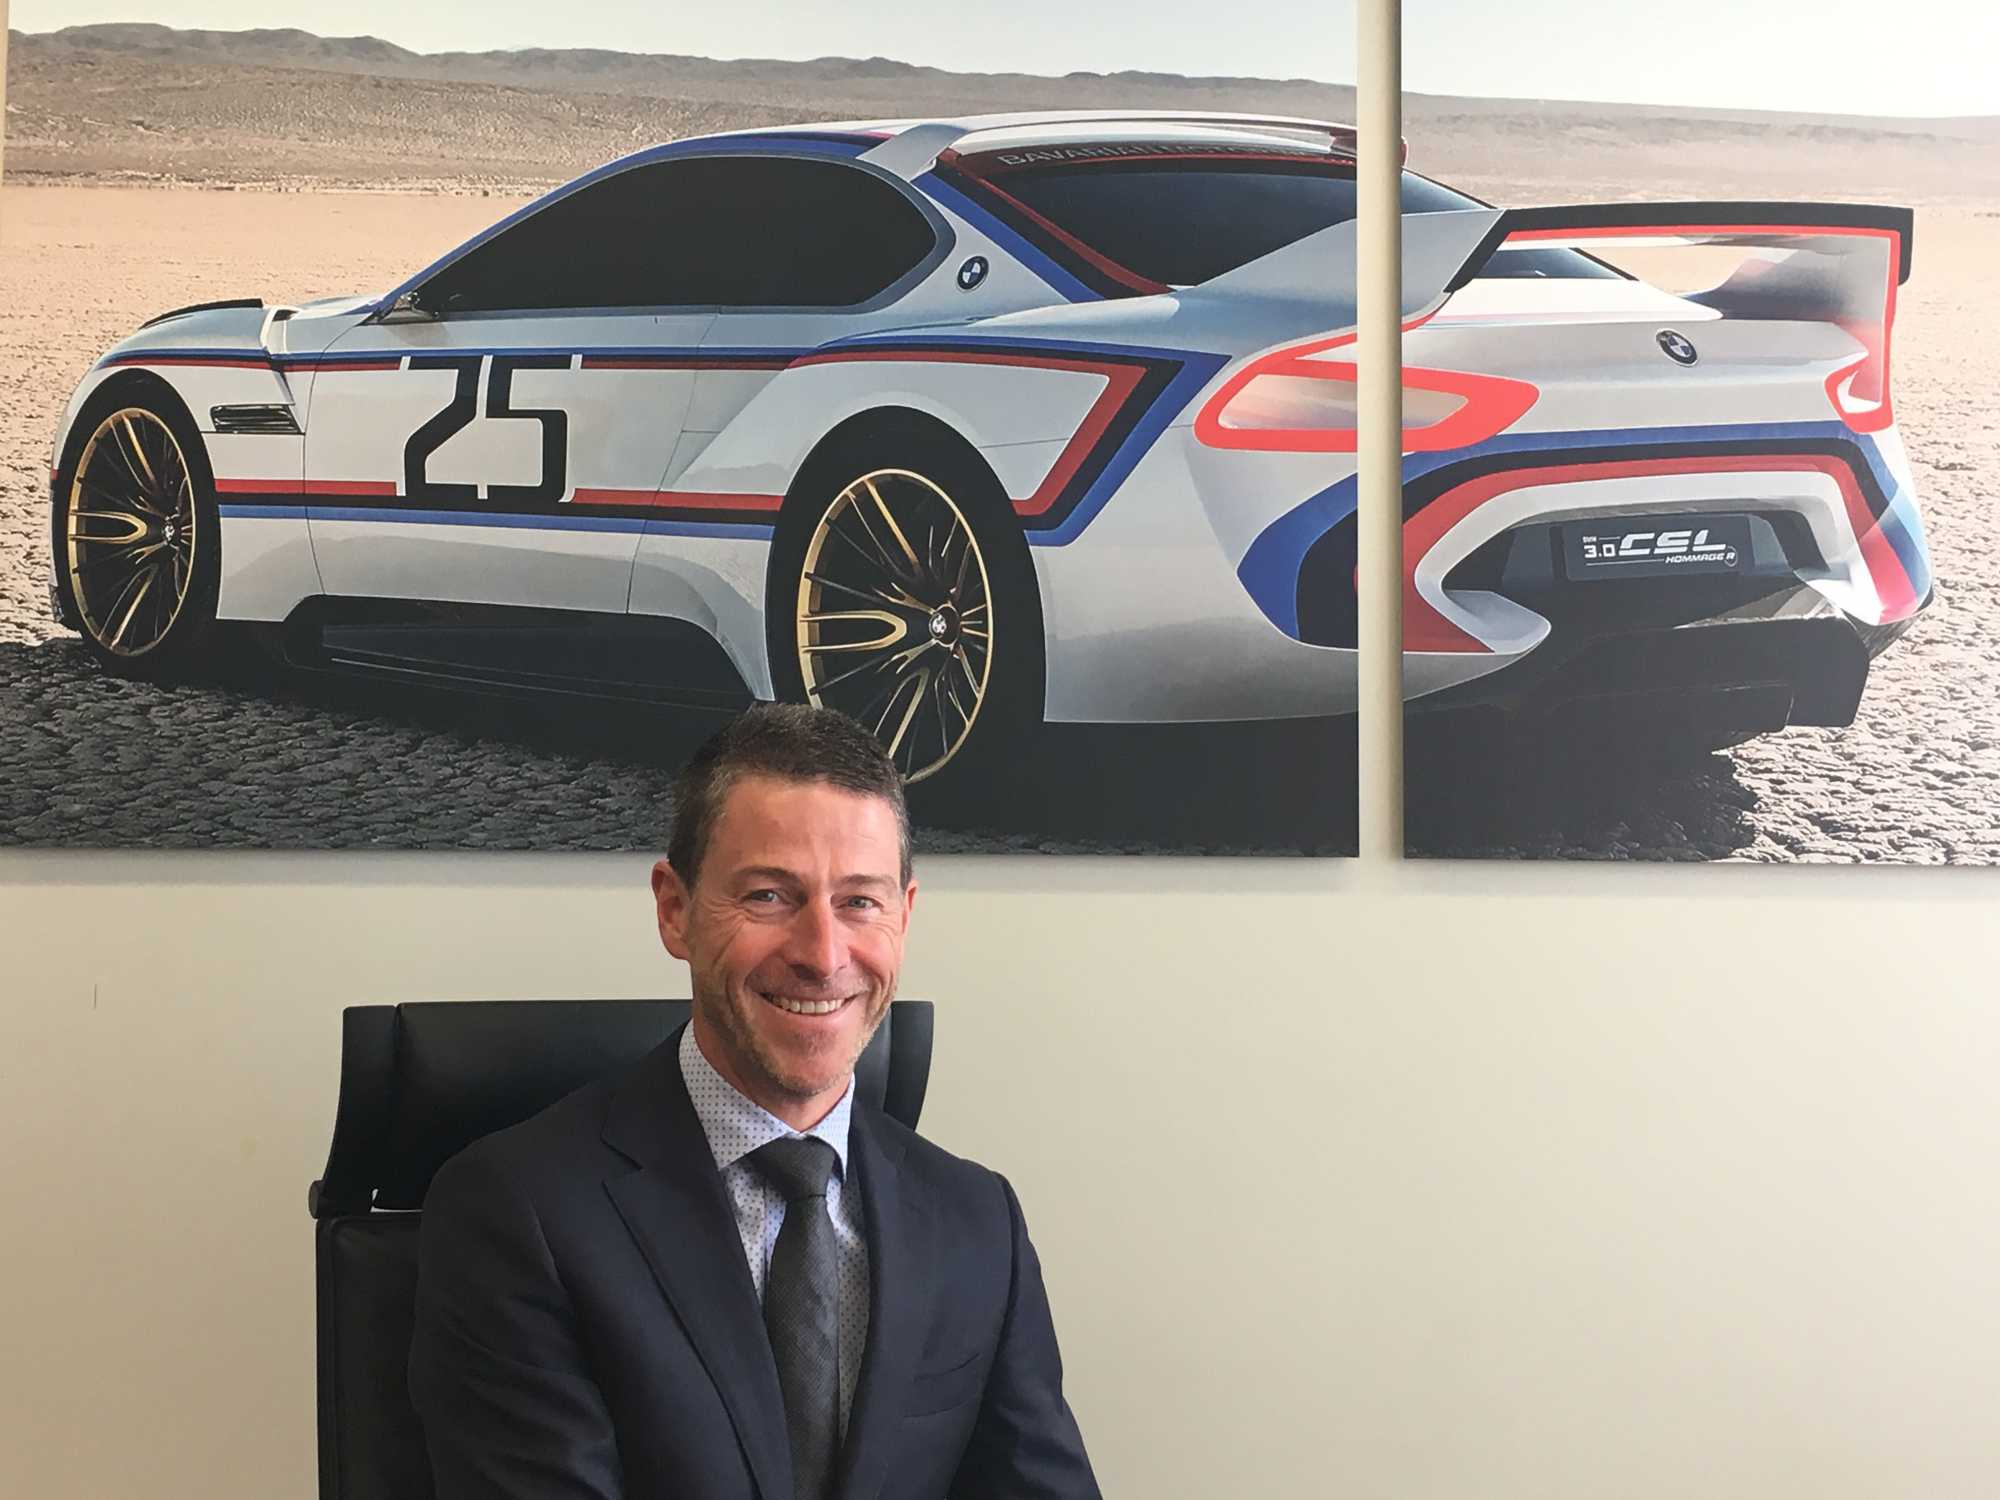 Eddy Haesendonck, President & CEO BMW Group Belux as of May 2018 (05/2018)